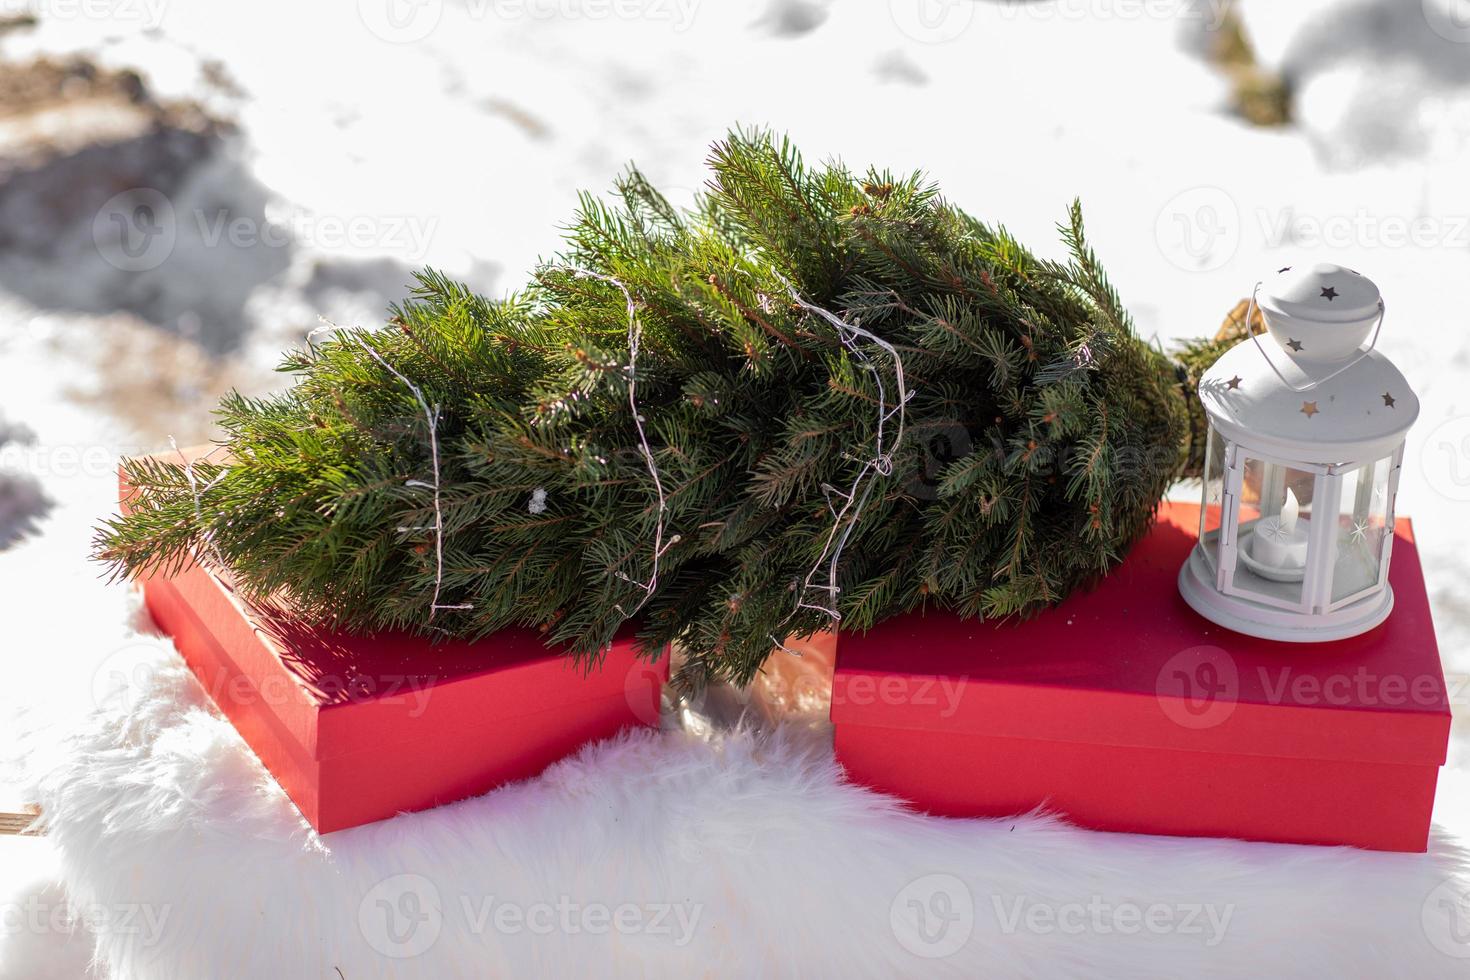 Red gift boxes, Christmas tree with garland, white lantern on white fluffy plaid outdoors in winter snowy day. Festive background. Holidays, presents, new year and celebration concept. copy space. photo